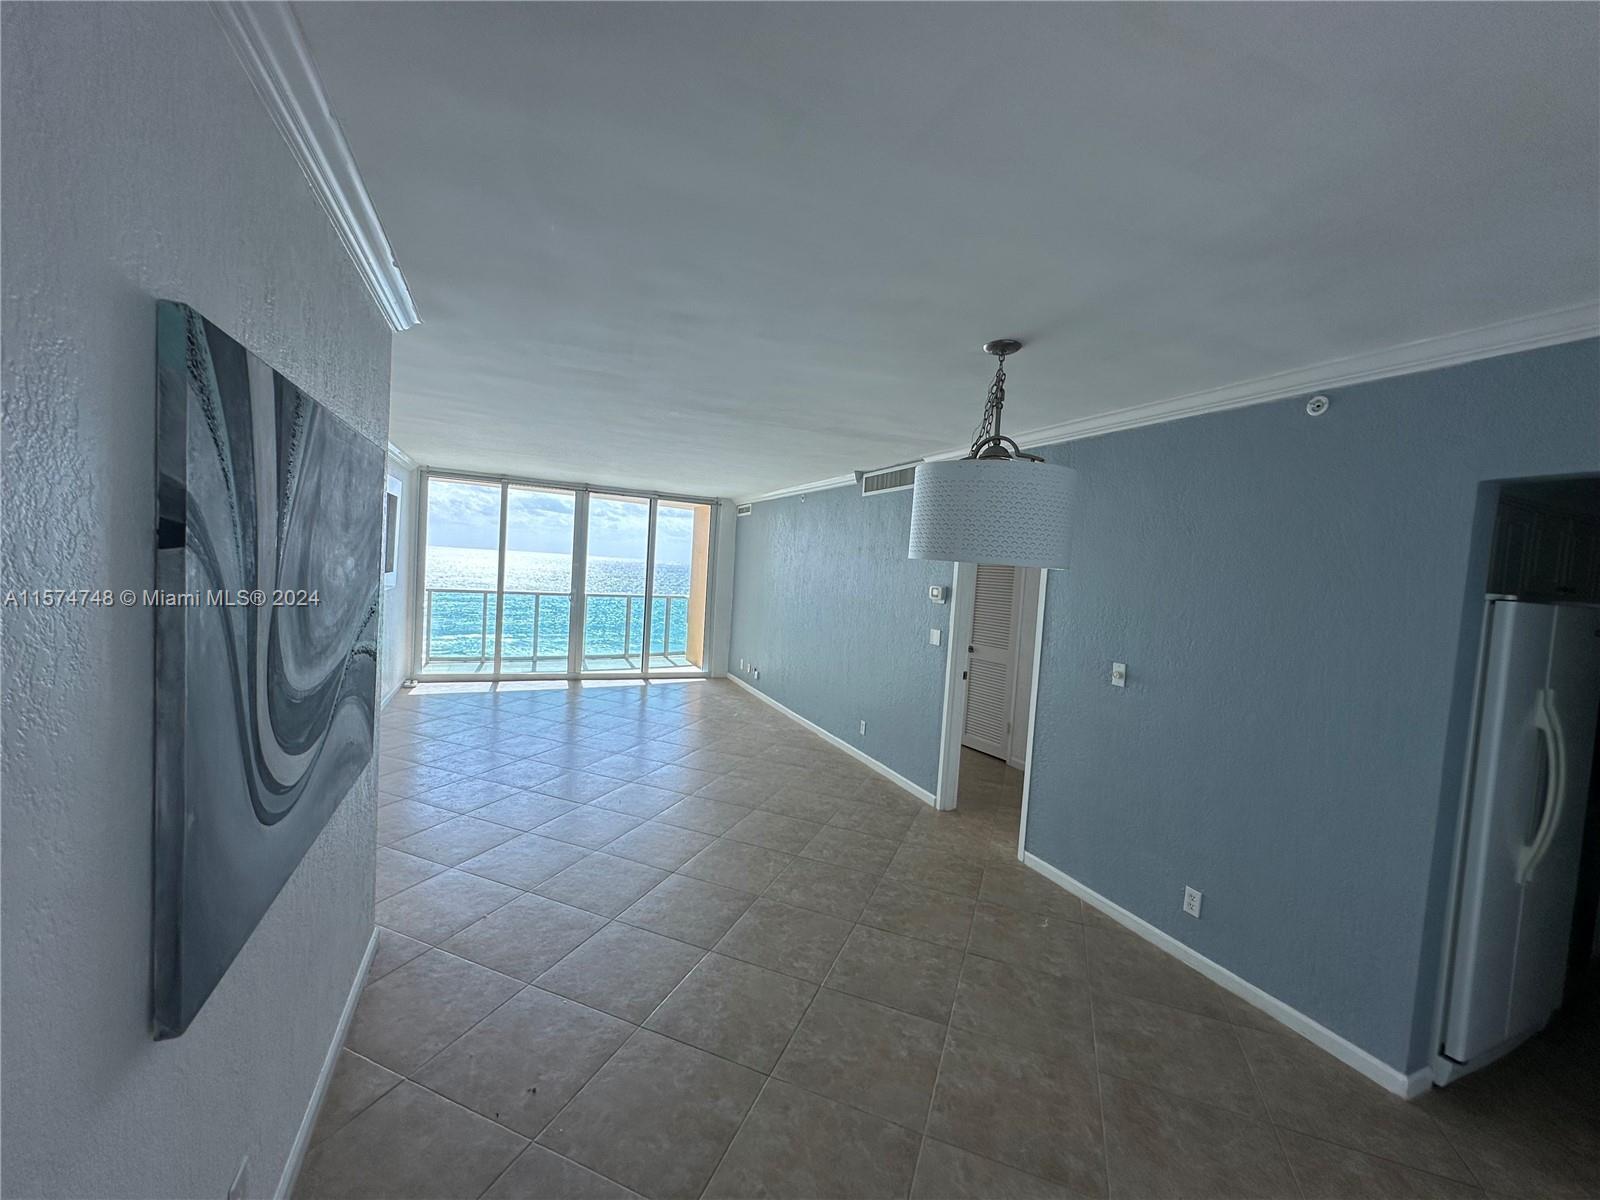 Spectacular 1 bedroom 1.5 bath DIRECT OCEANFRONT unit. Impact windows and sliding doors open up to a